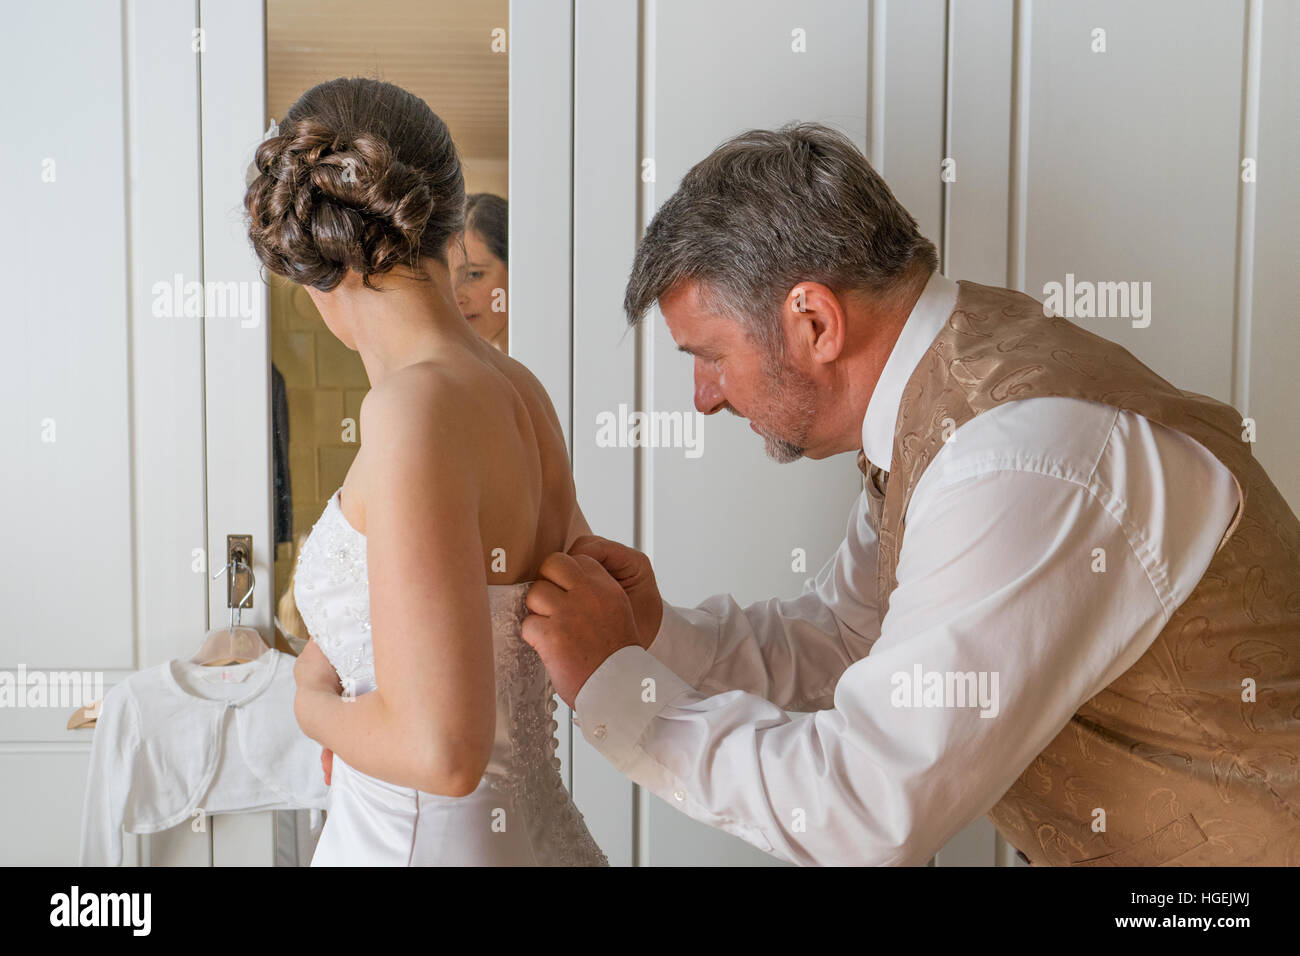 groom helps the bride to dress Stock Photo